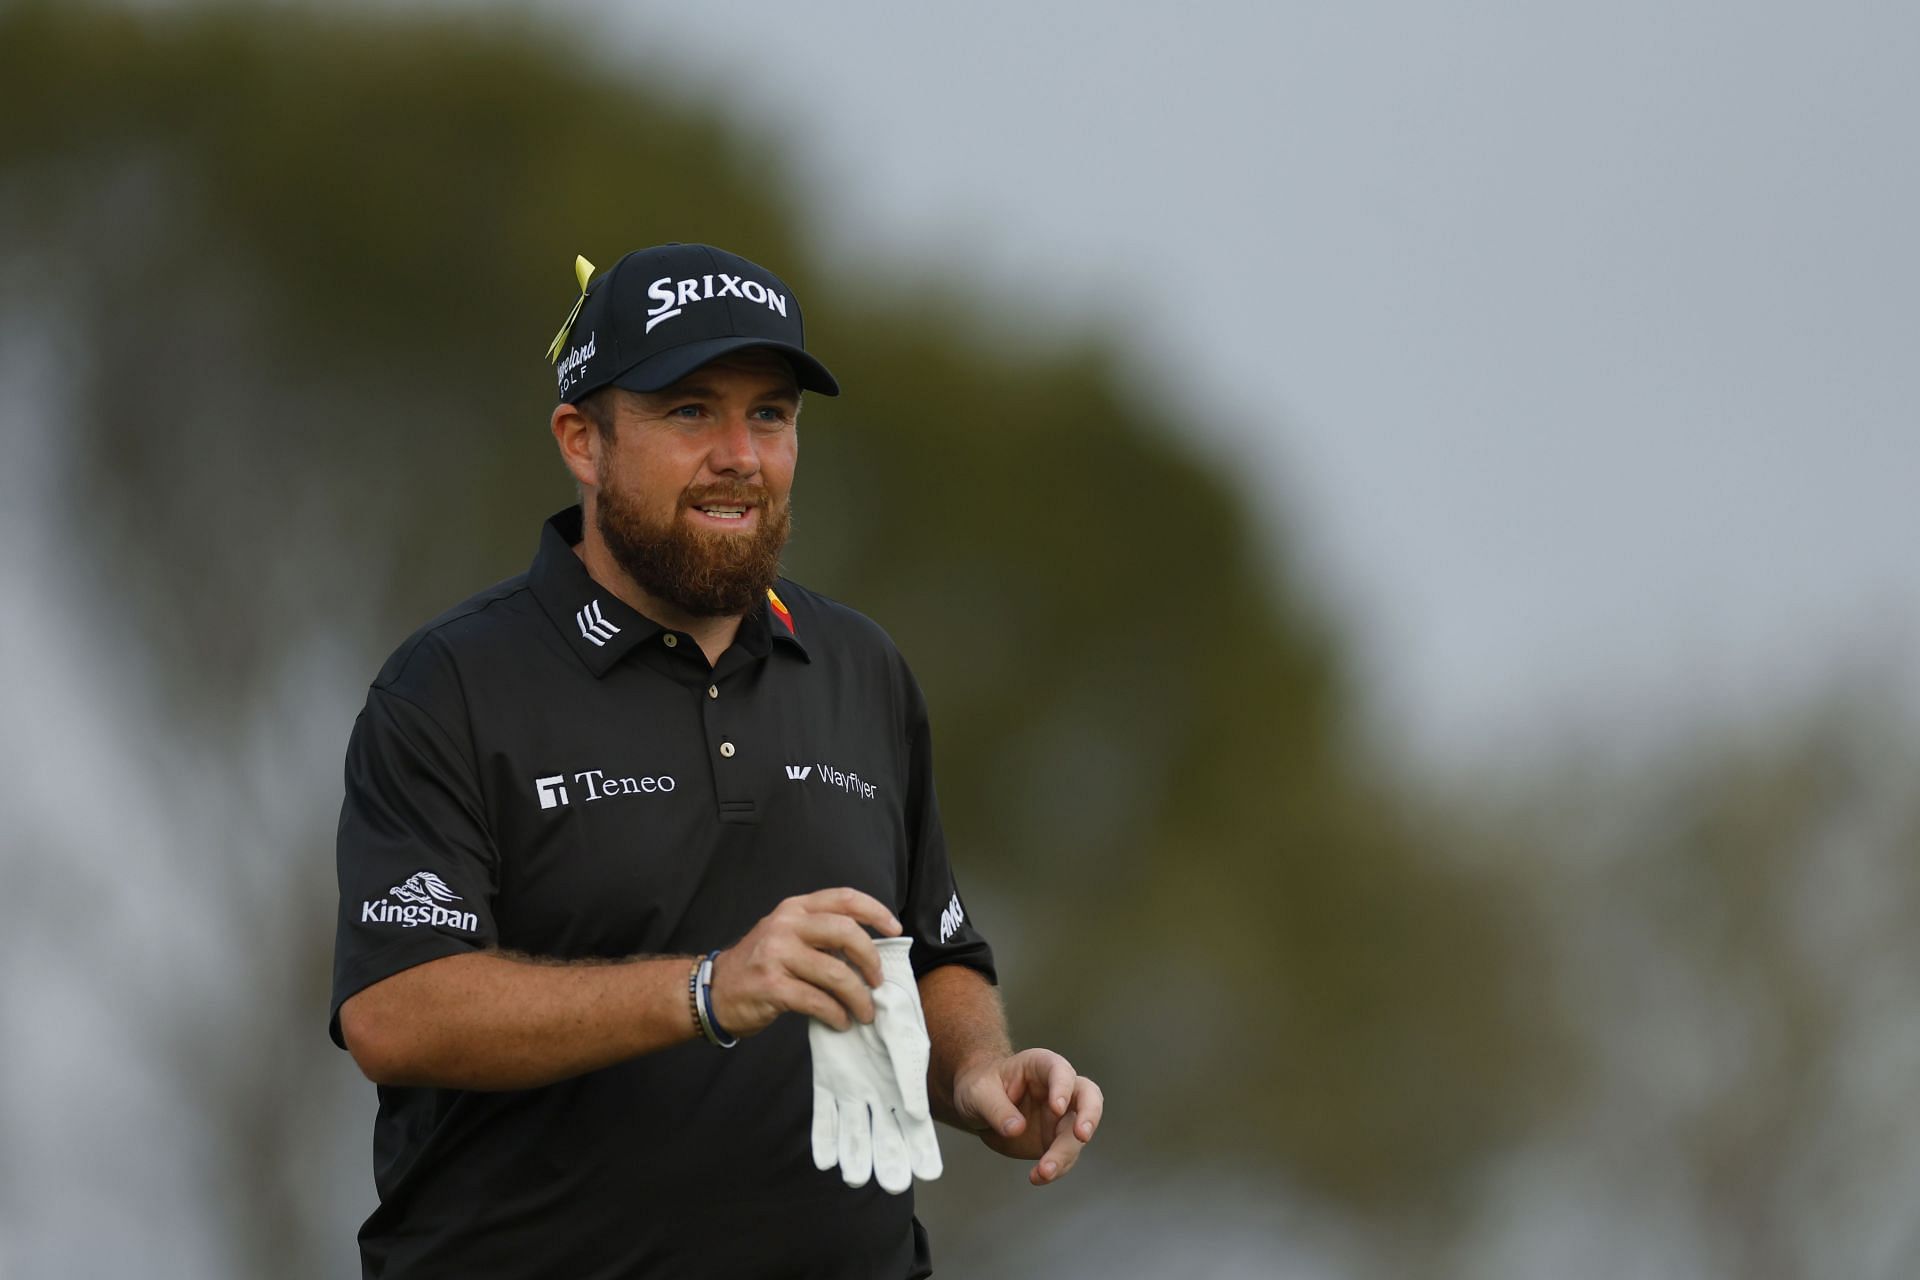 Shane Lowry is the co-leader at the 2e024 Arnold Palmer Invitational after 54 holes